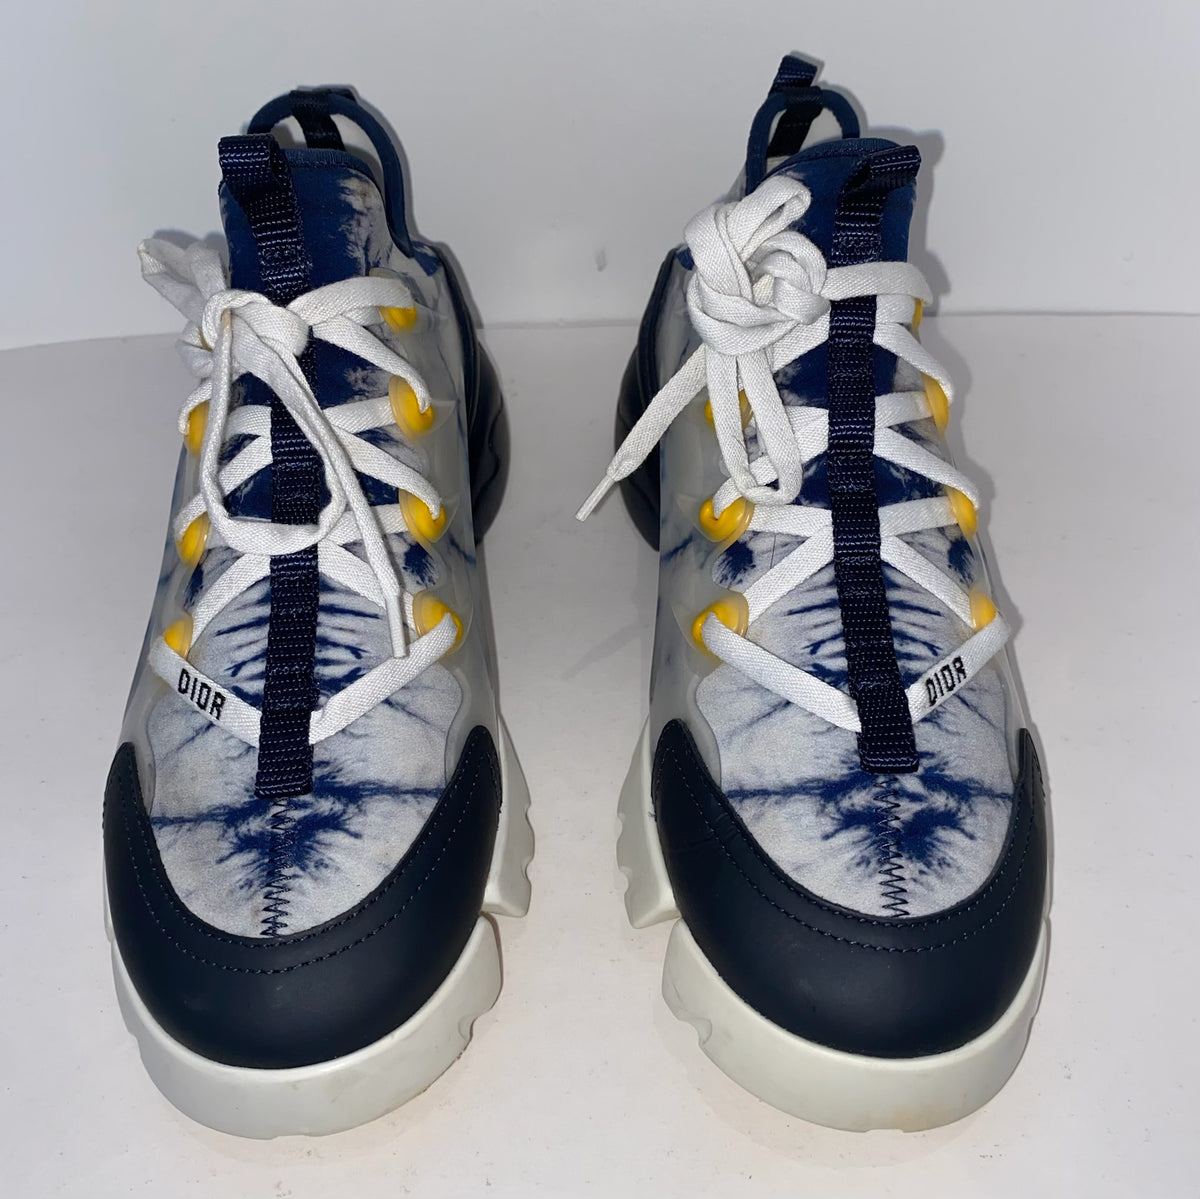 Dior CD1 Sneakers With Tie-Dye Print Release 20, Drops